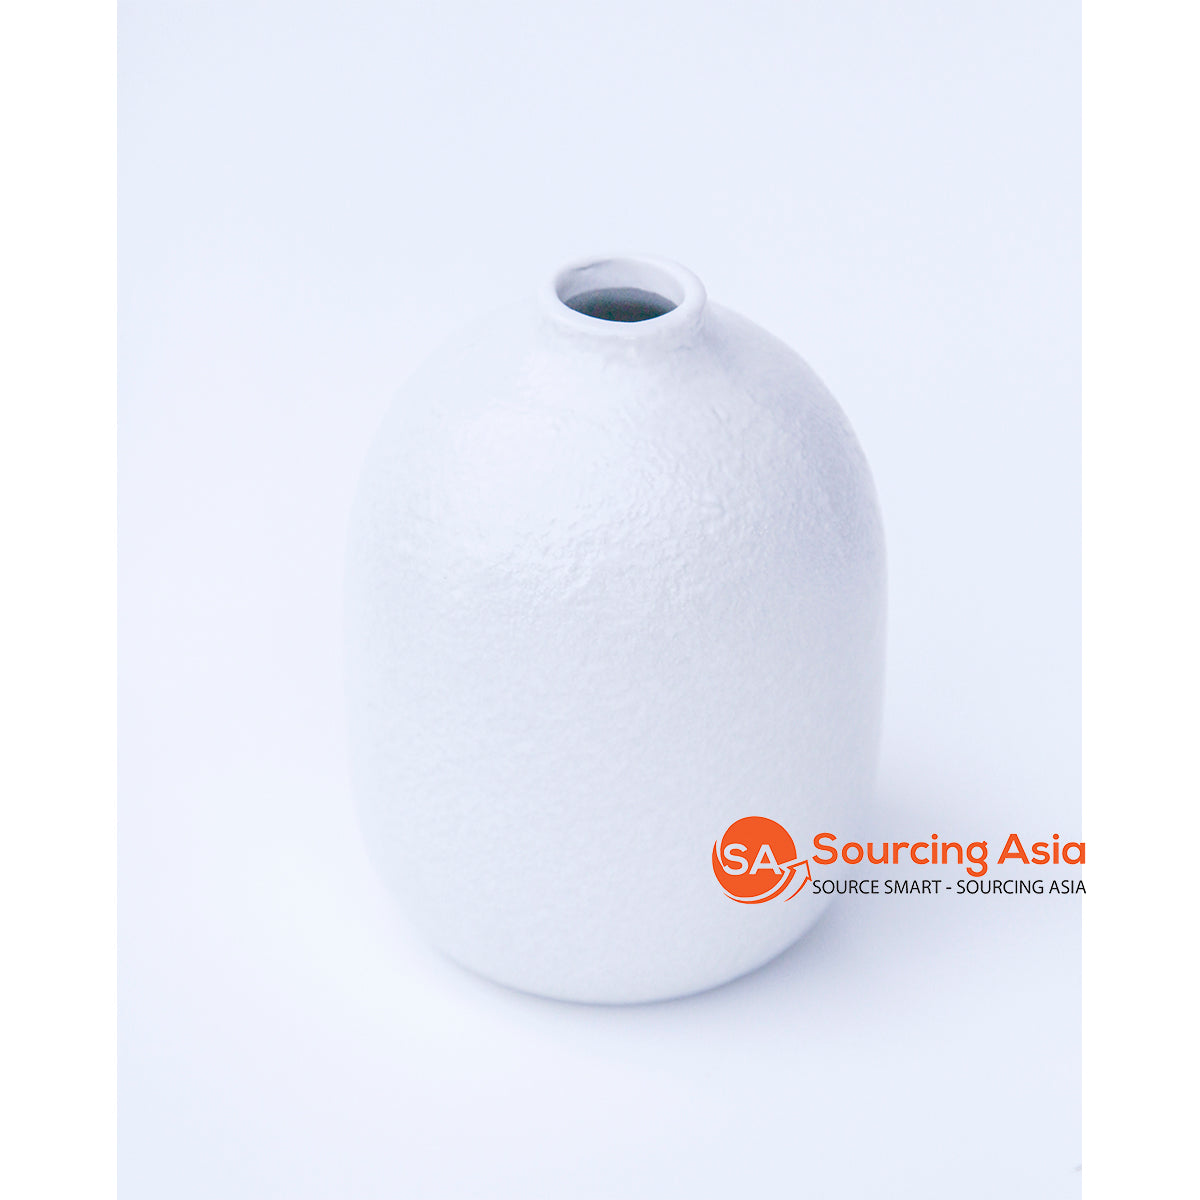 PNJ006 CERAMIC WITH A GRAINY SURFACE VASE COLOR WHITE TEXTURED